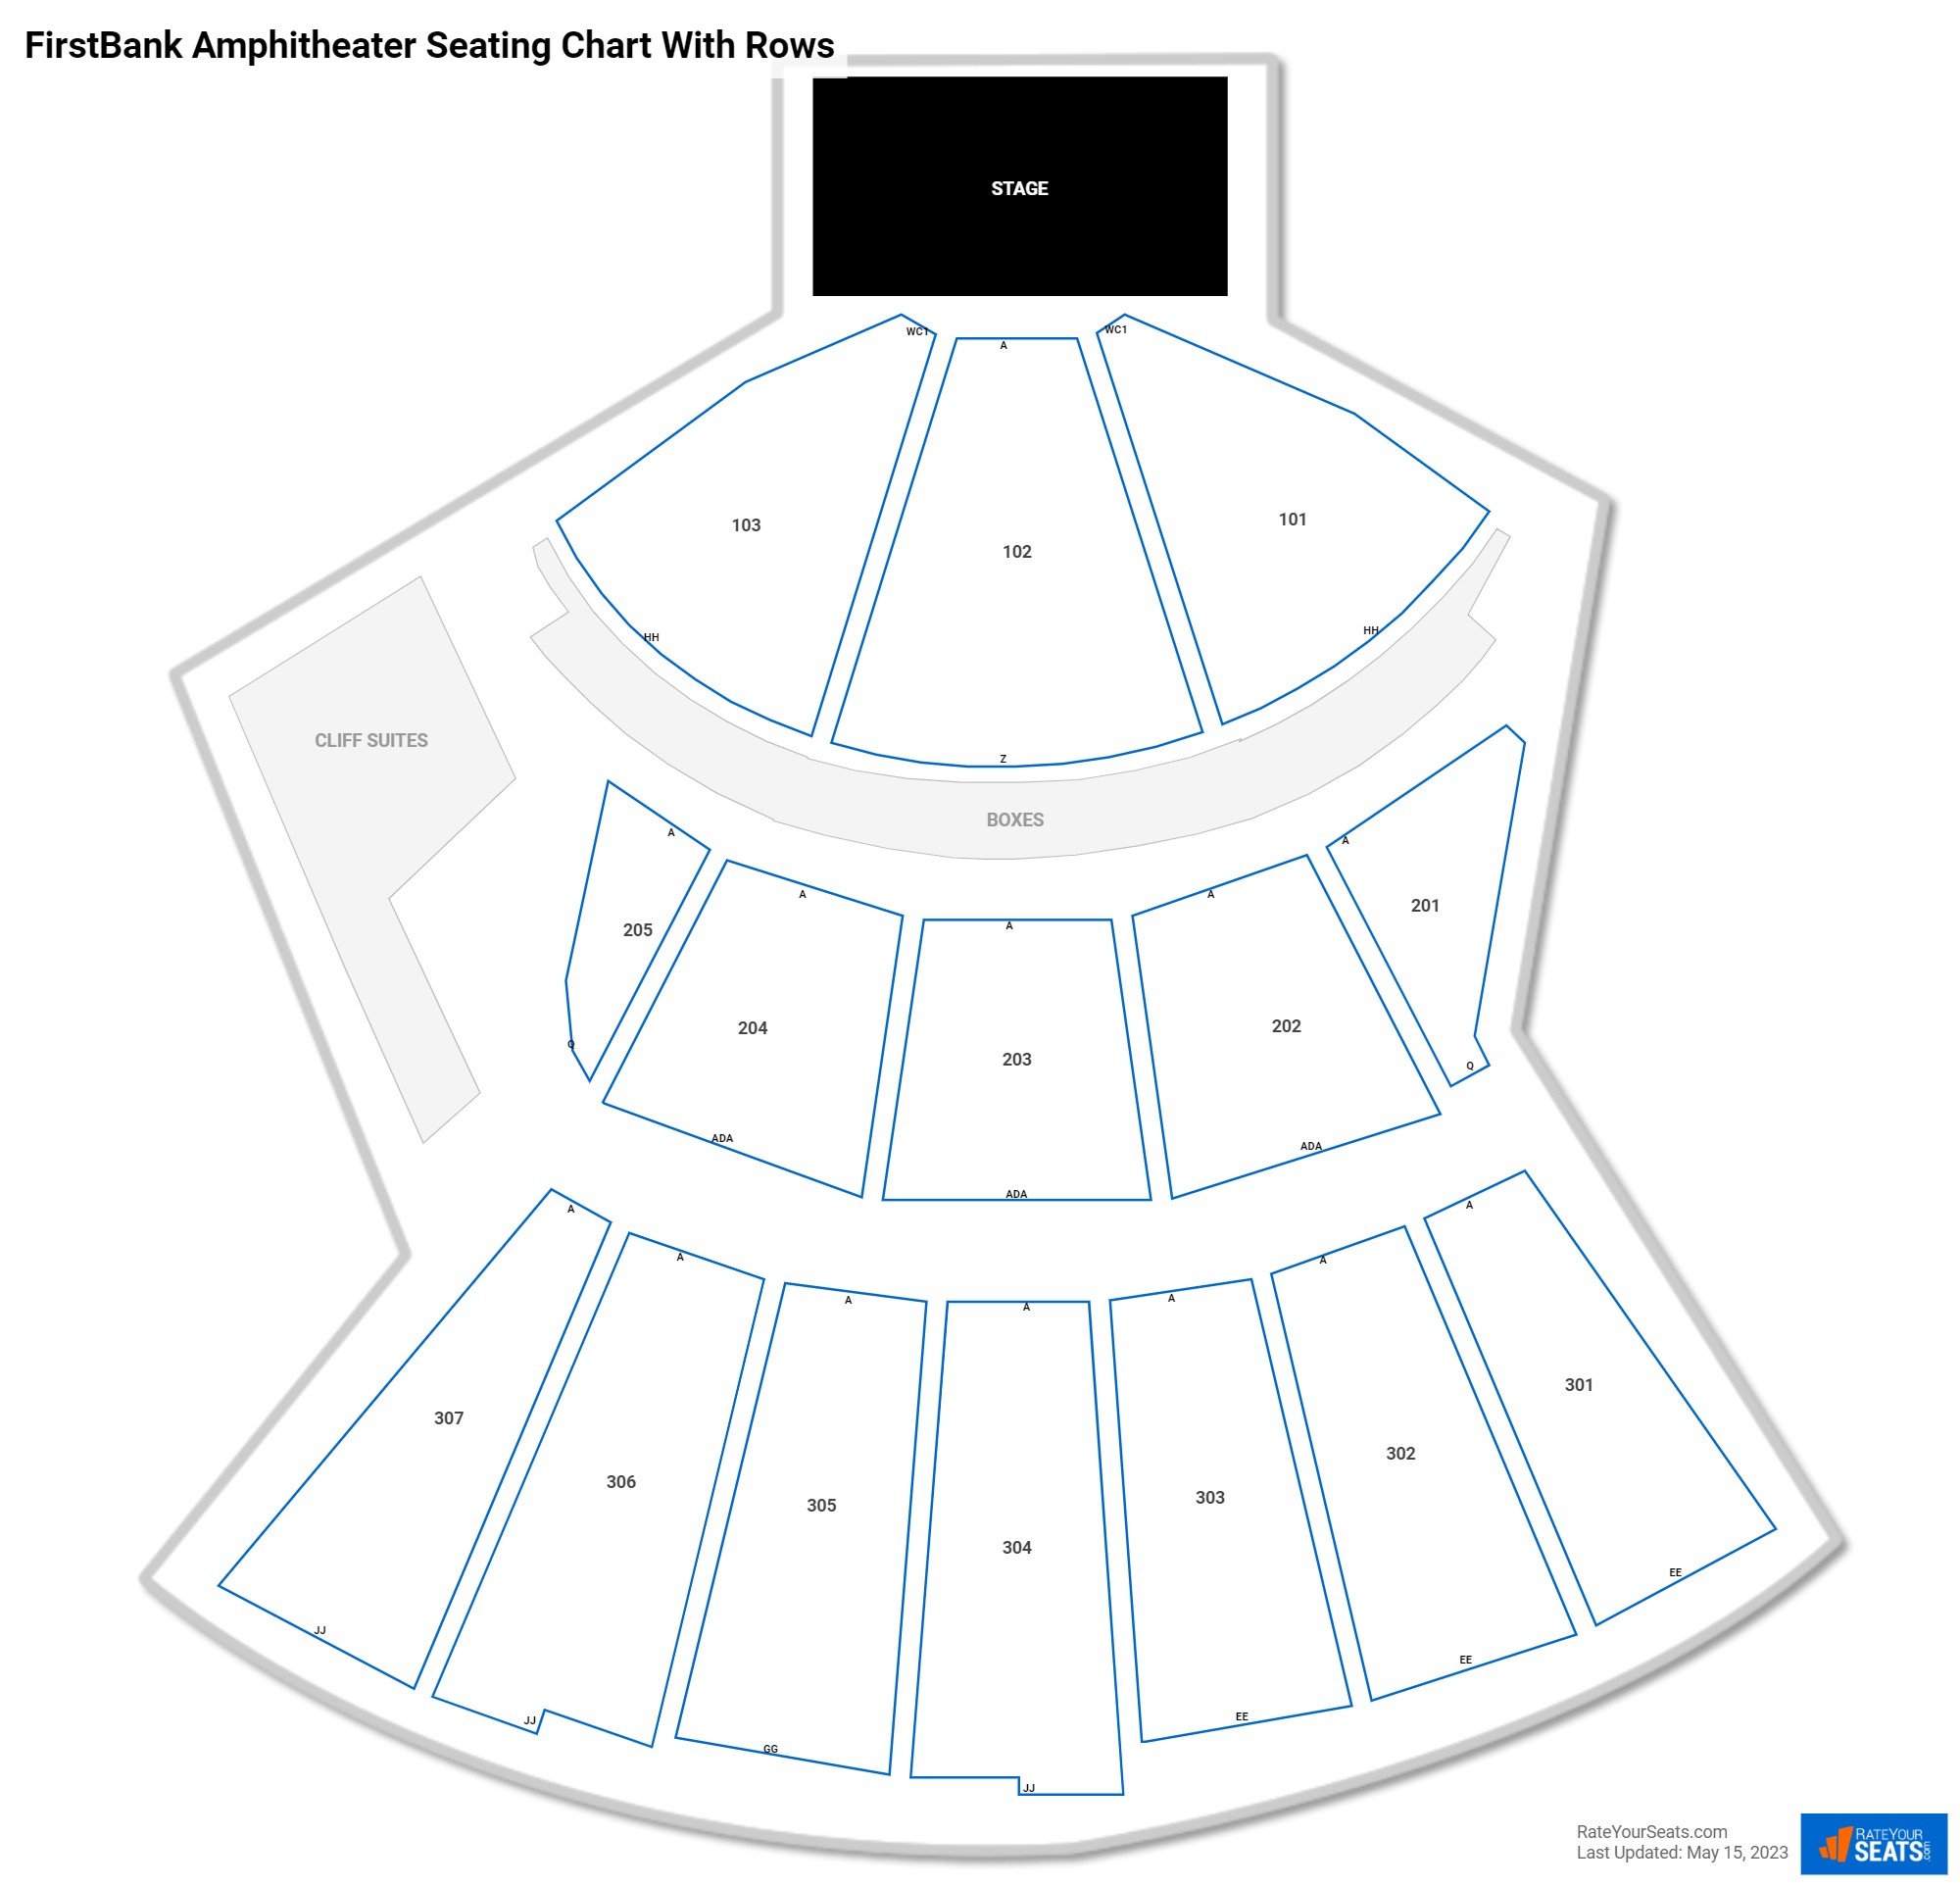 FirstBank Amphitheater seating chart with row numbers